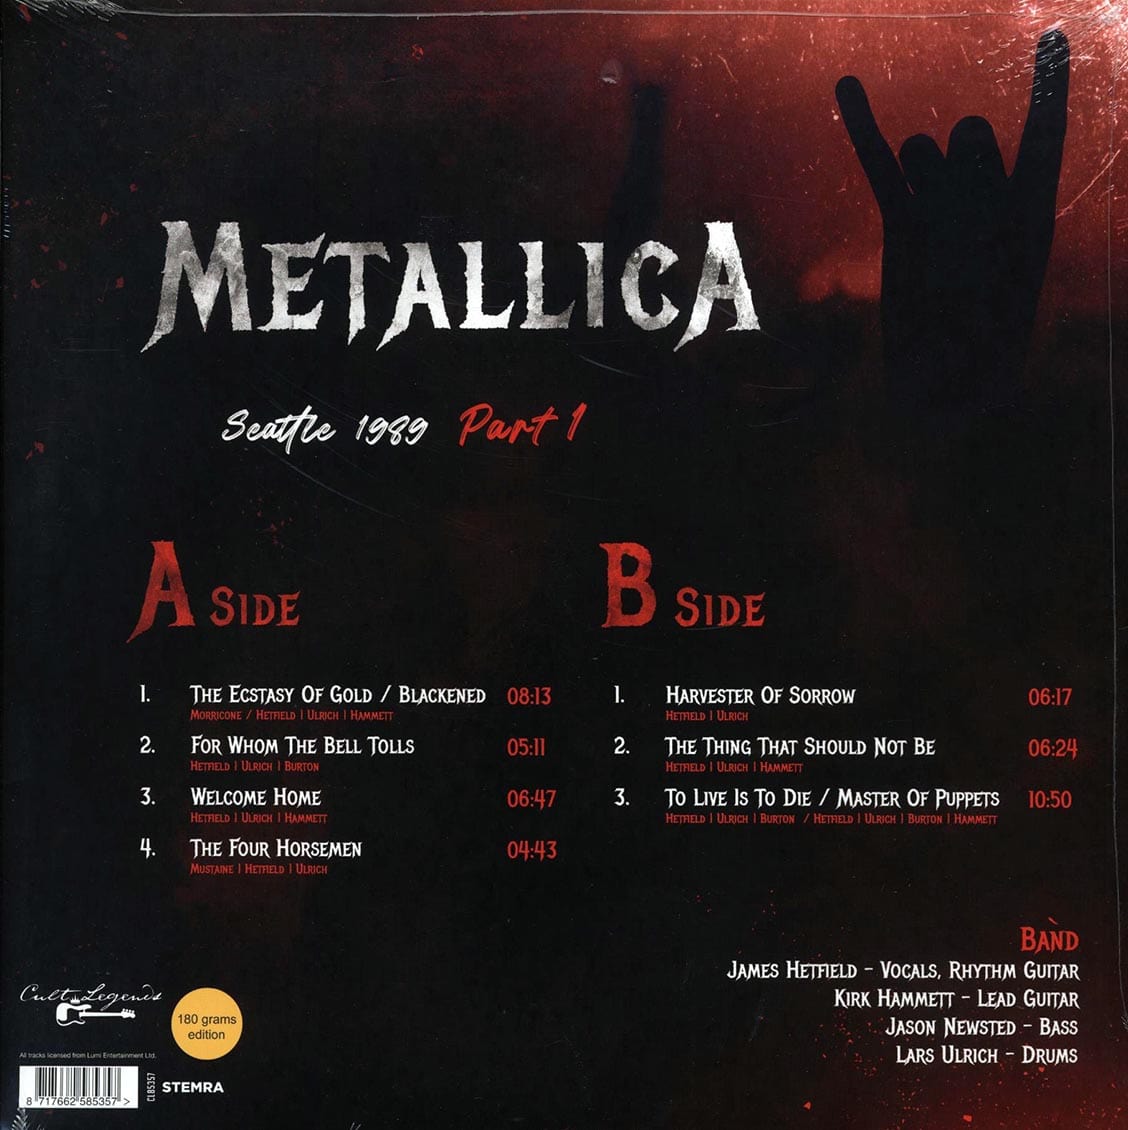 METALLICA: Live at The Hammersmith Odeon, London September 21st, 1986 –  Grindhouse Releasing